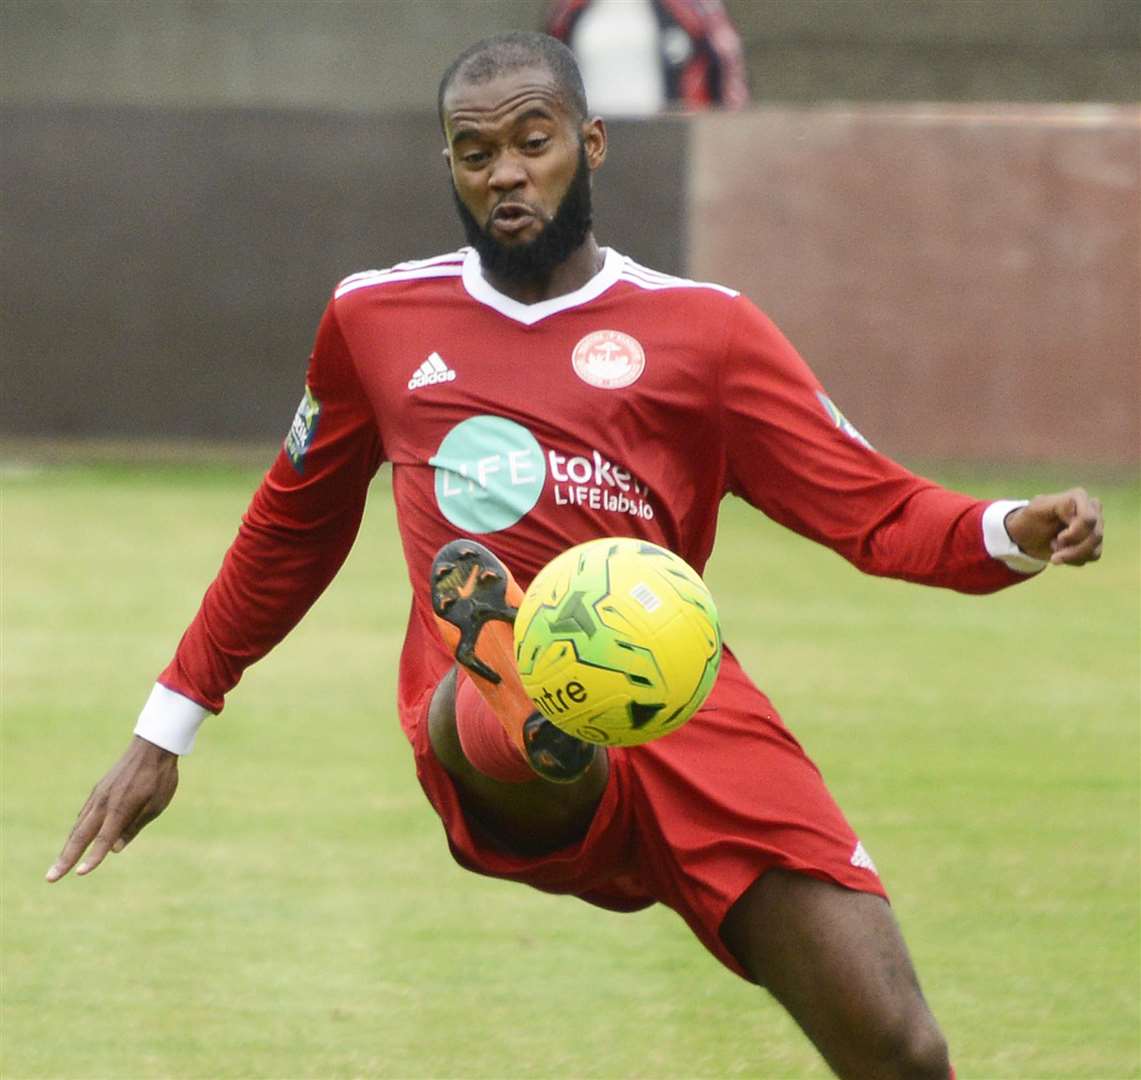 Hythe hat-trick man Zak Ansah takes the game to East Grinstead Picture: Paul Amos